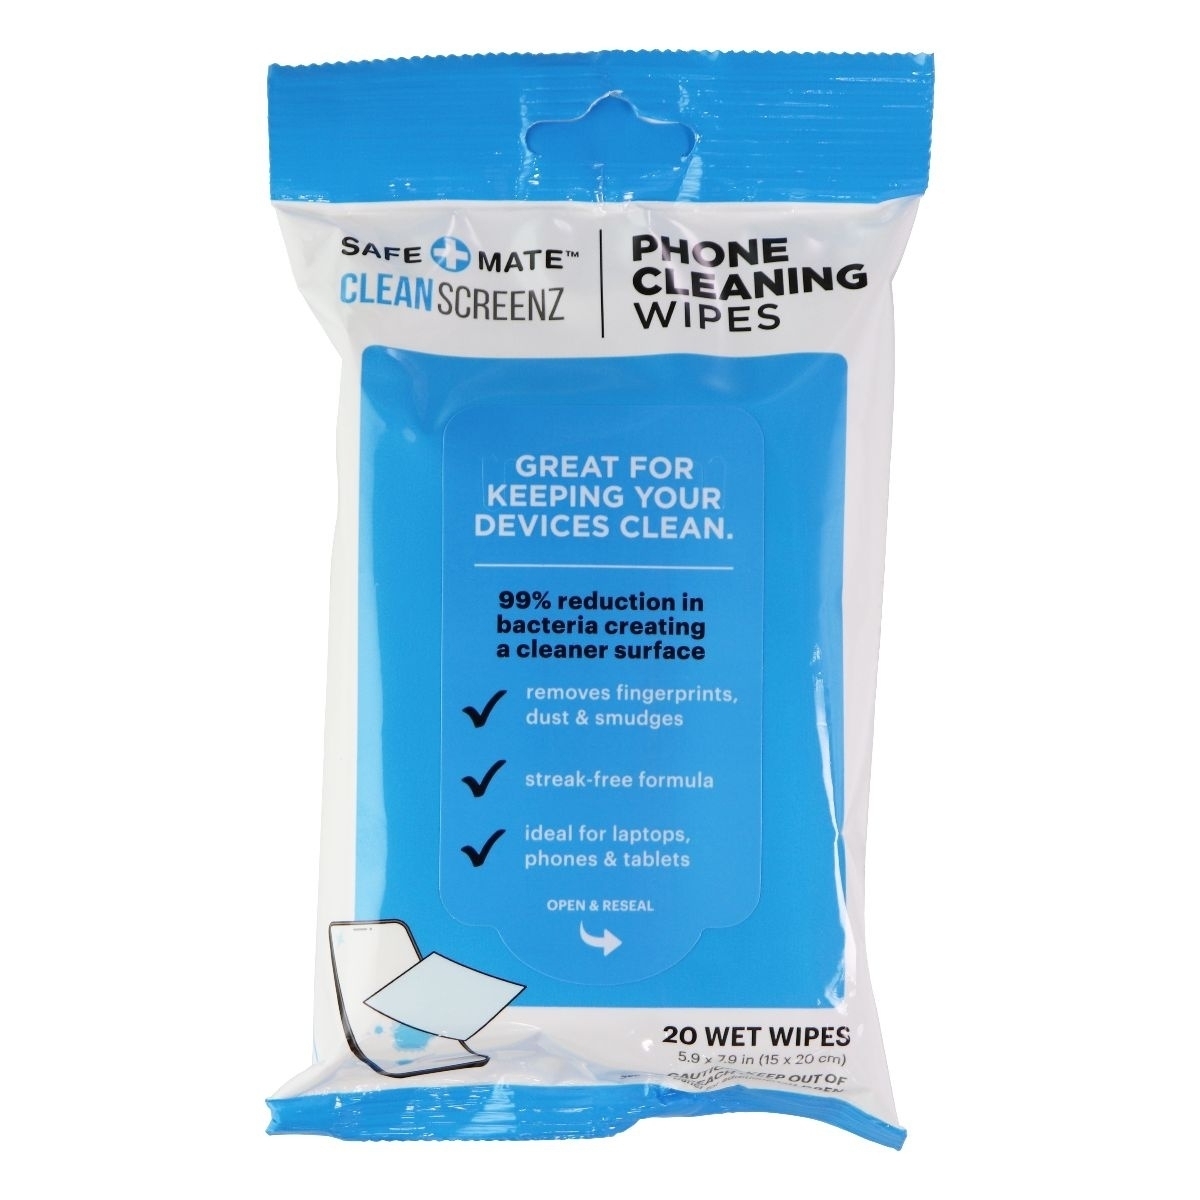 SafeMate Screenz Phone & Tablet Cleaning Wipes (20 Wipe Per Pack, 5.9x7.9in)